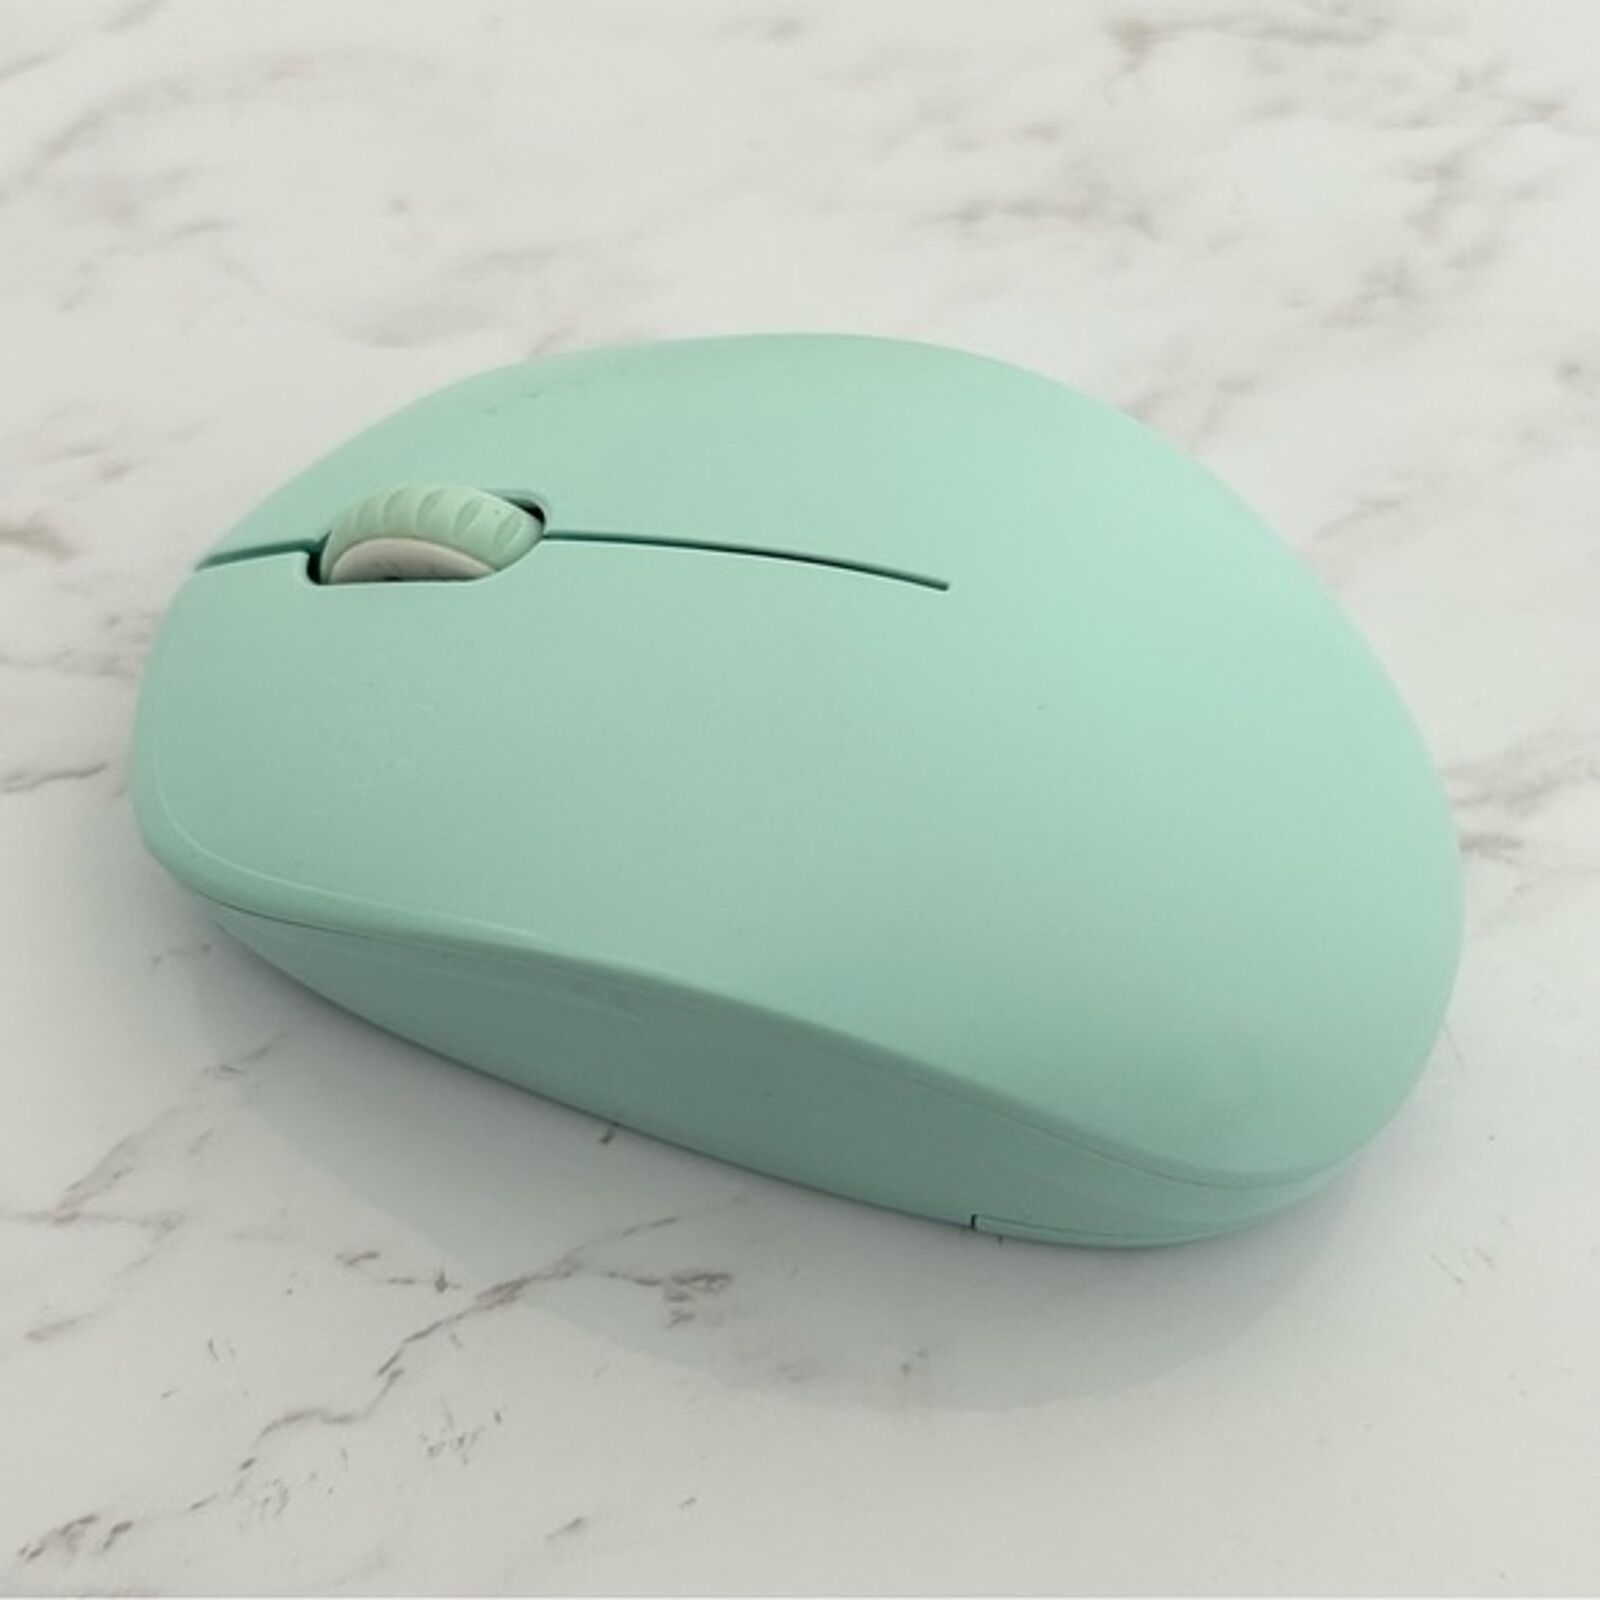 Seenda Noiseless Wireless Mouse with USB Receiver in Mint Green PC Laptop